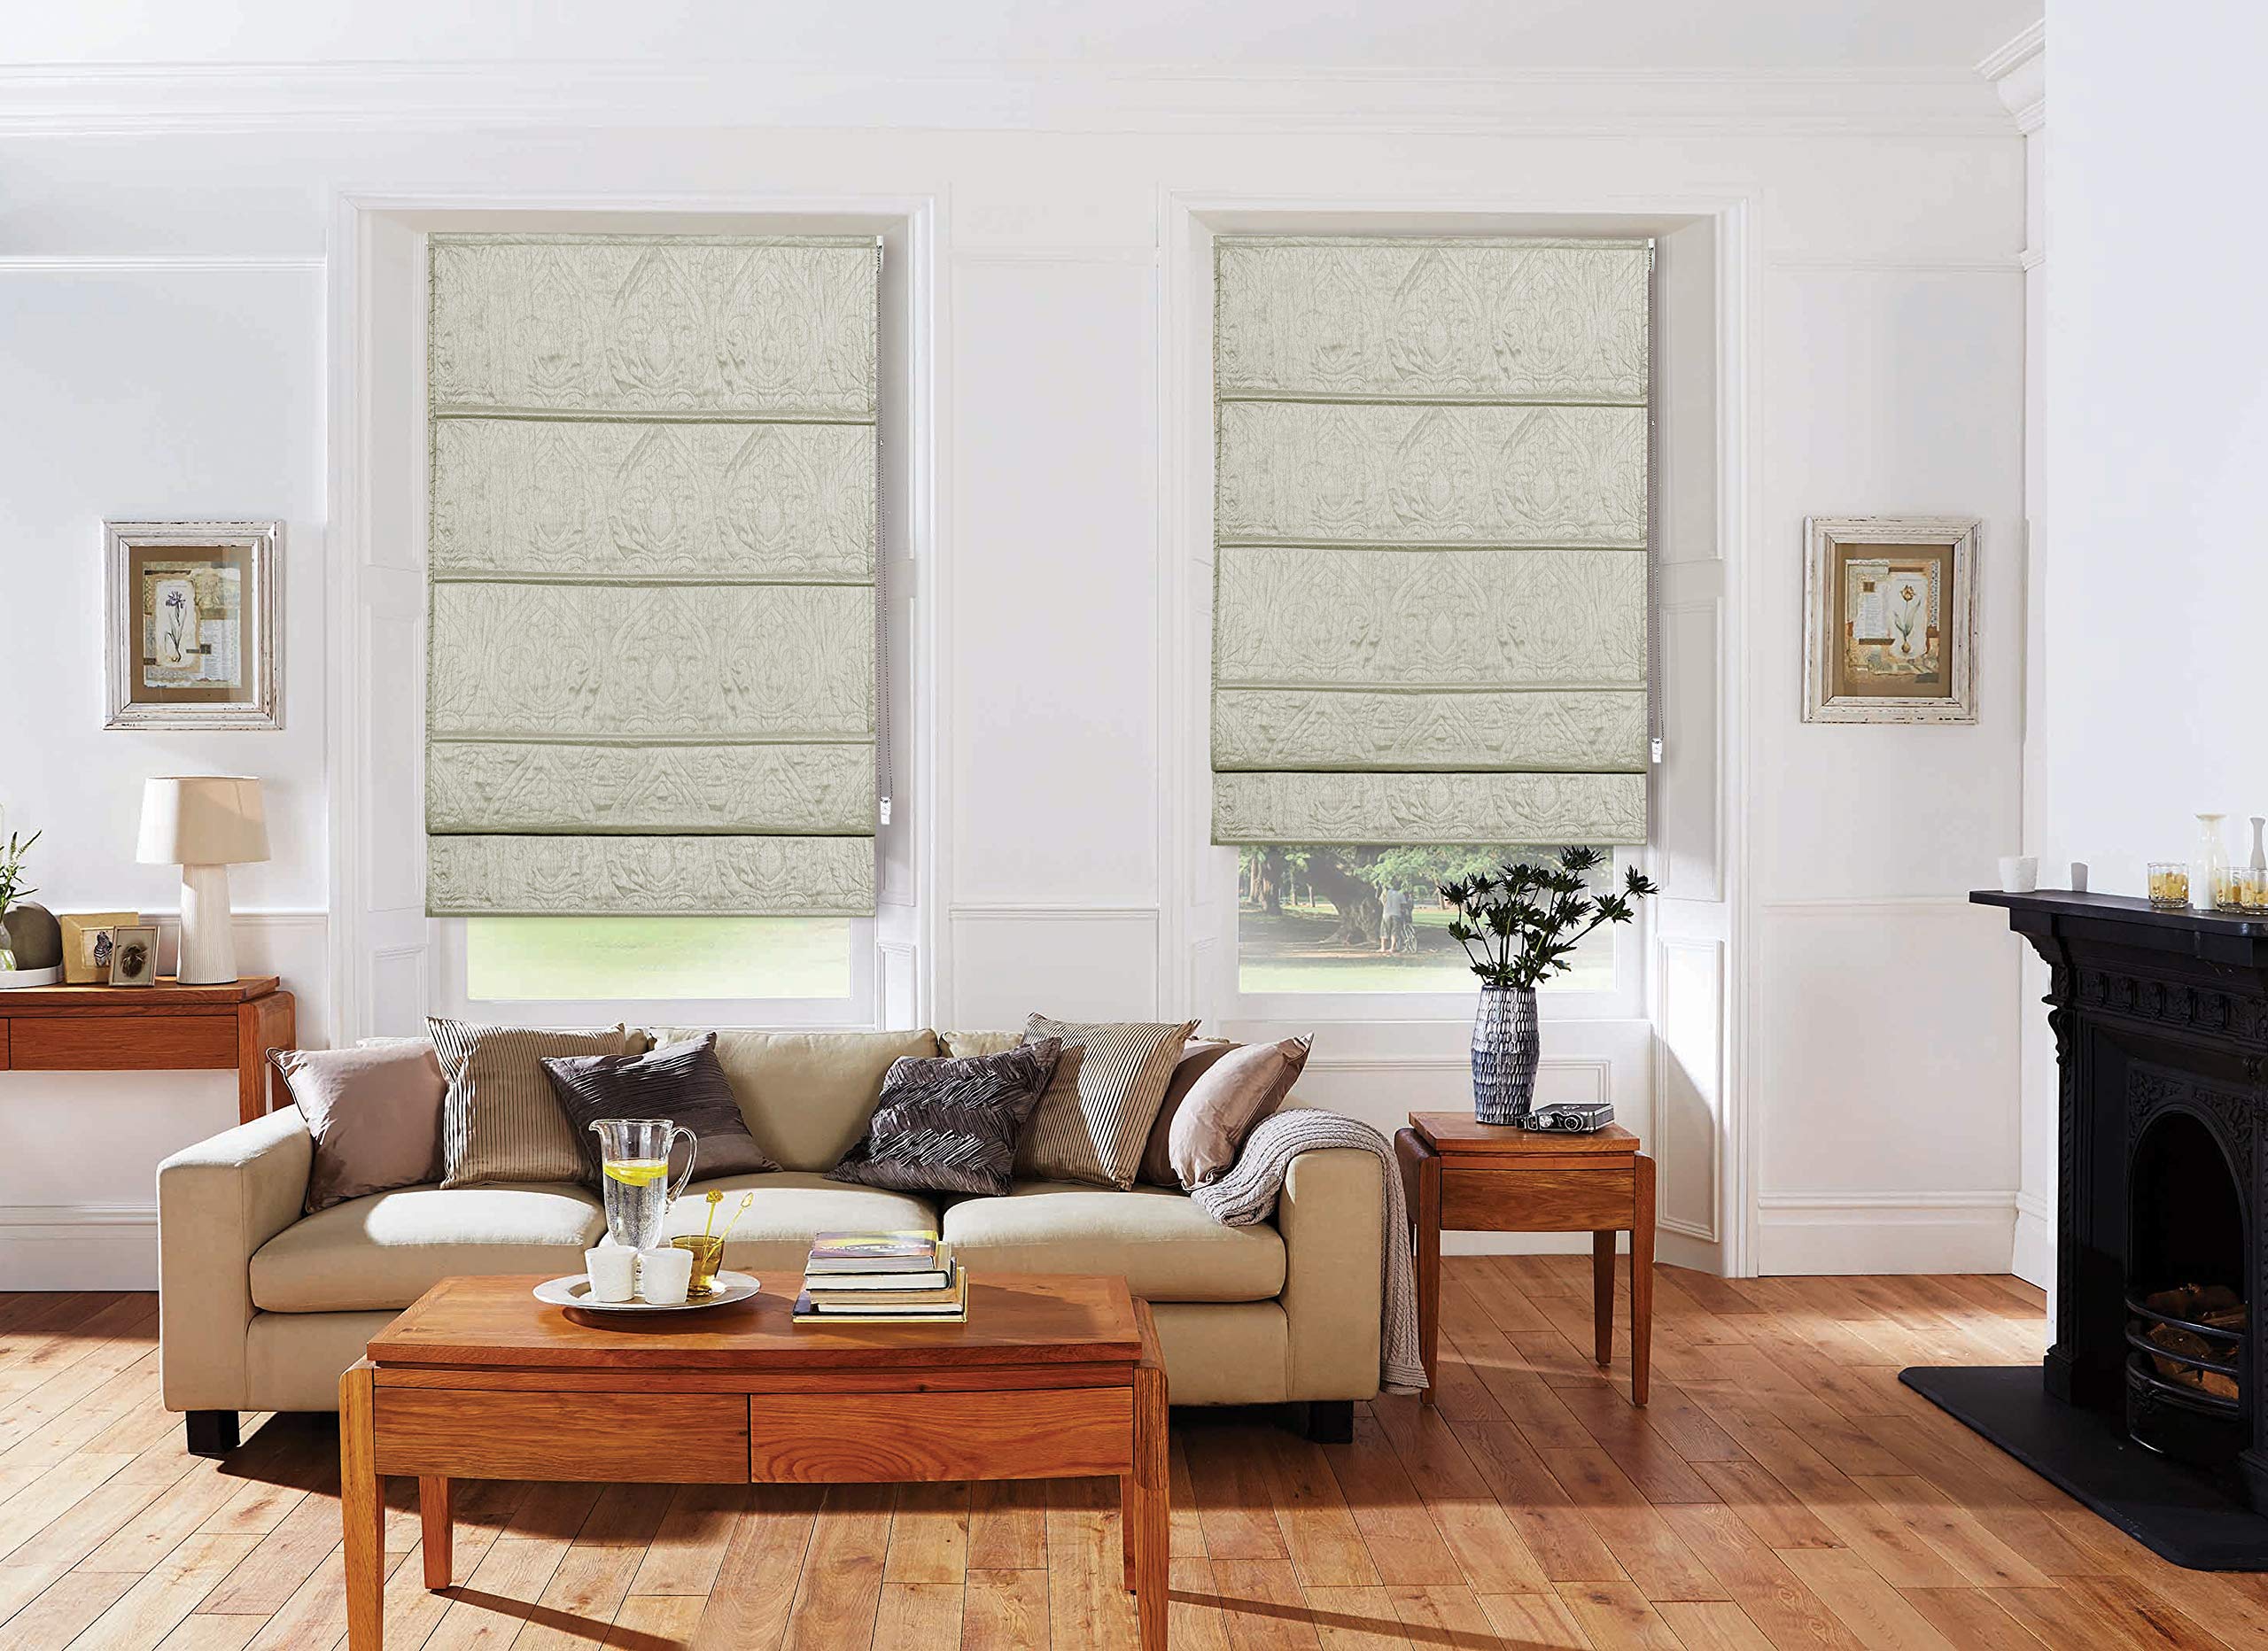 Cleaning and Caring for Roman Blinds